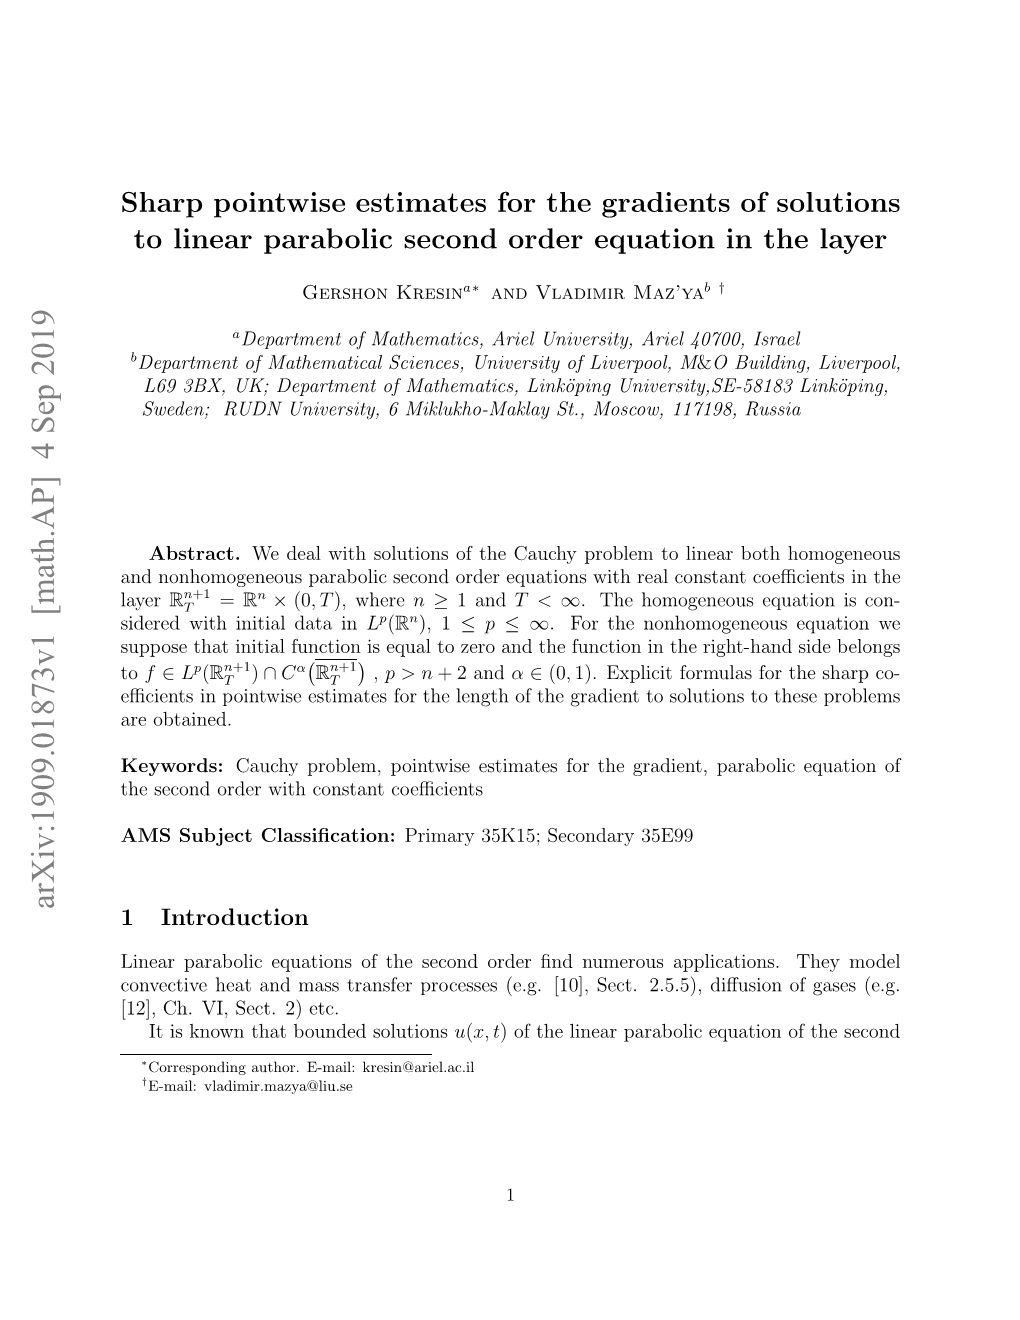 Sharp Pointwise Estimates for the Gradients of Solutions to Linear Parabolic Second Order Equation in the Layer